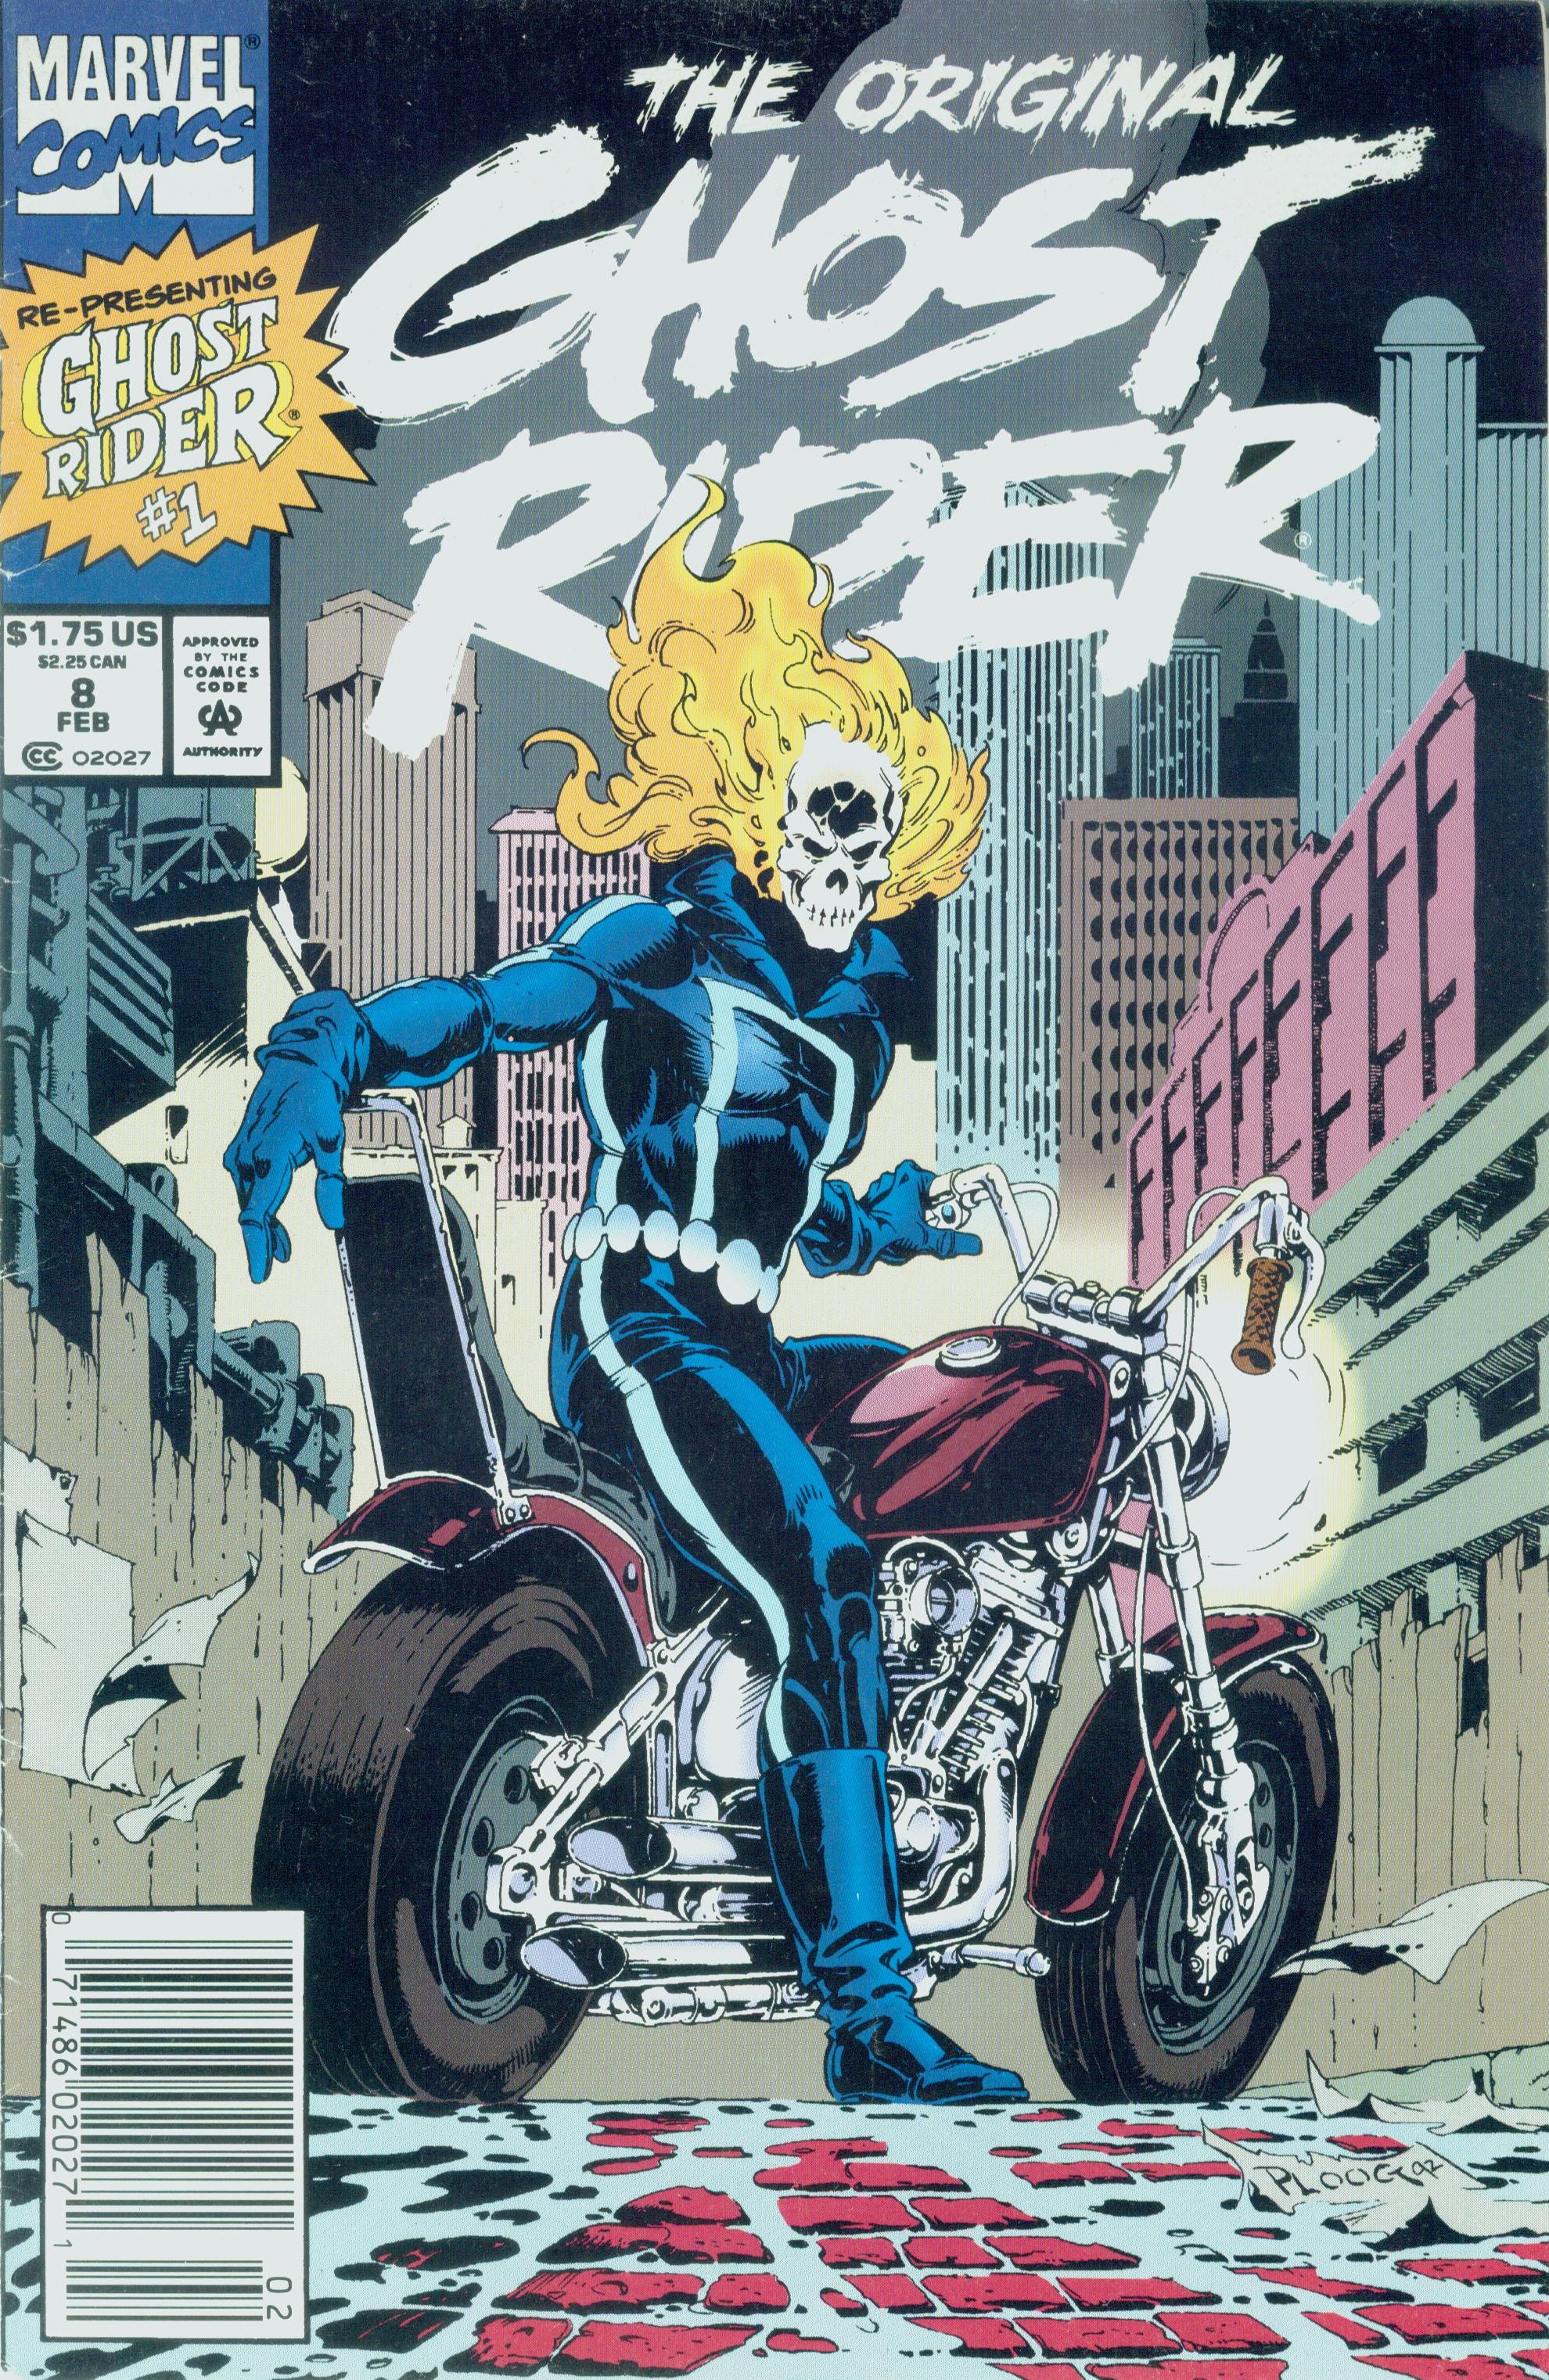 Read online The Original Ghost Rider comic -  Issue #8 - 1